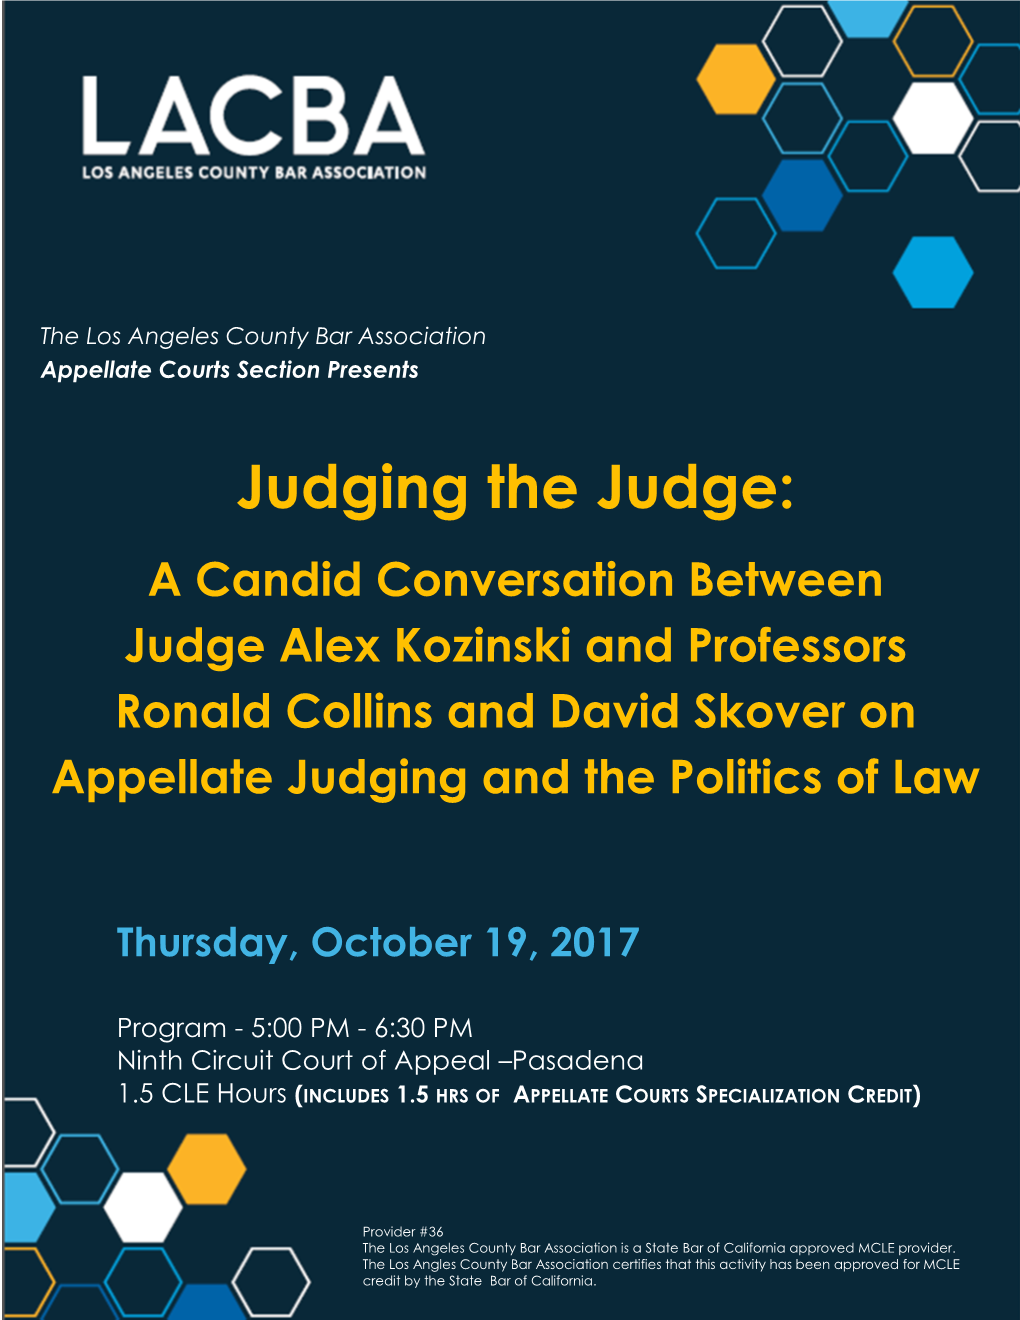 Judging the Judge: a Candid Conversation Between Judge Alex Kozinski and Professors Ronald Collins and David Skover on Appellate Judging and the Politics of Law